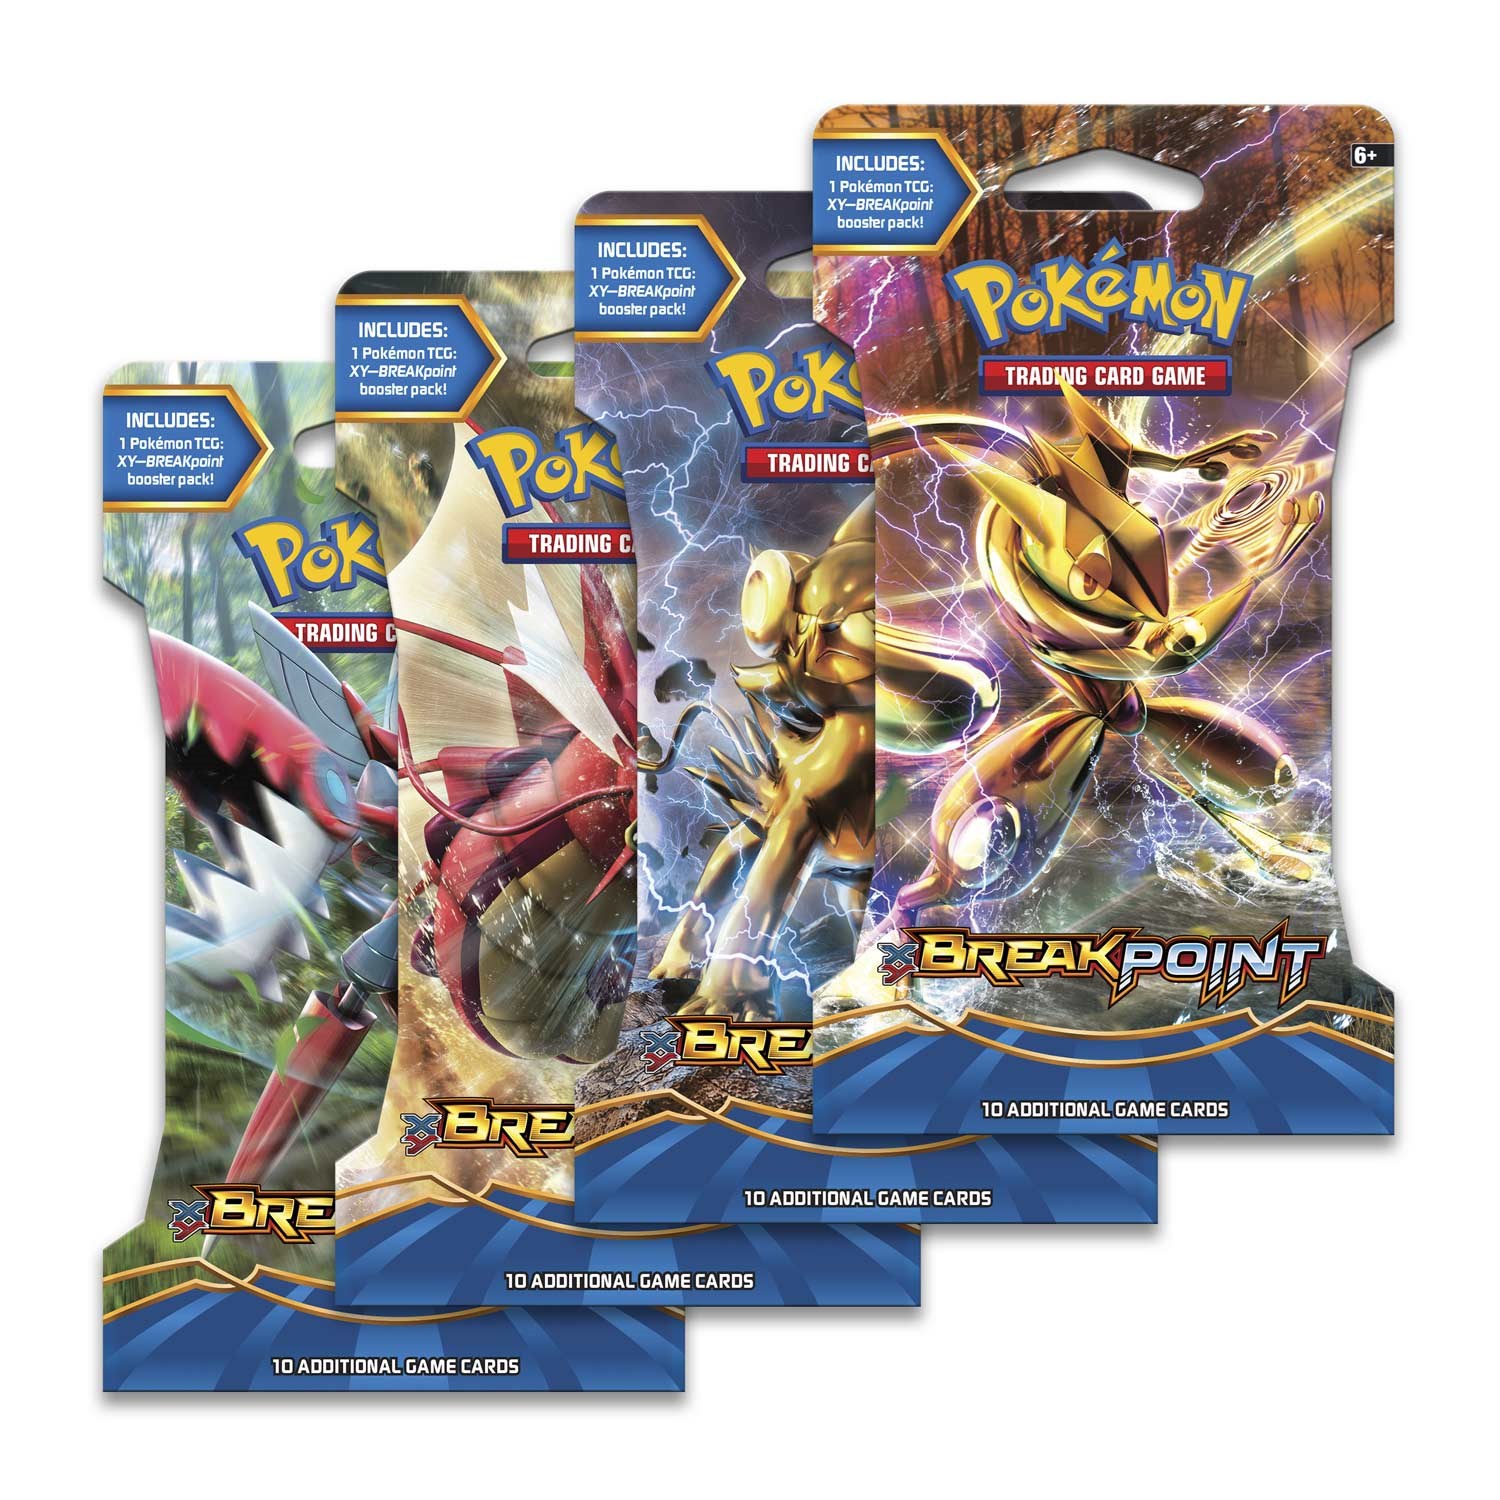 Pokémon TCG FBA_152-80070 for sale online XY BREAKpoint Sleeved Booster Pack 